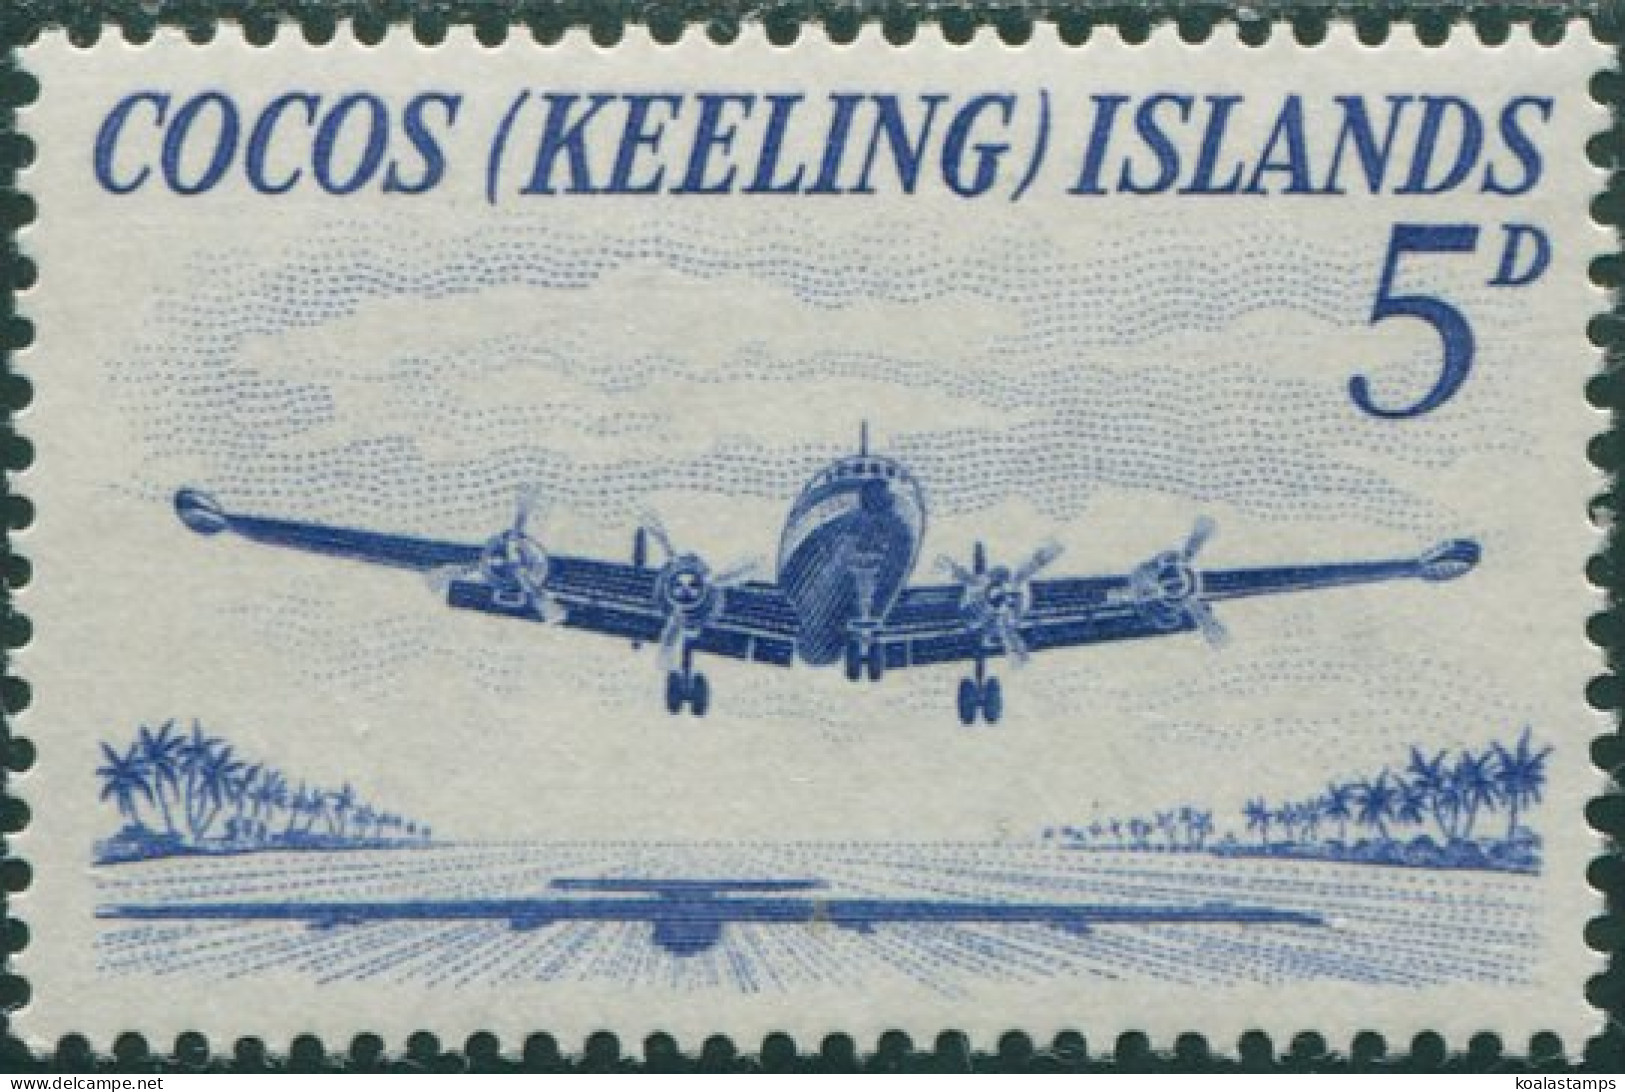 Cocos Islands 1963 SG2 5d Lockheed Airliner MNH - Isole Cocos (Keeling)